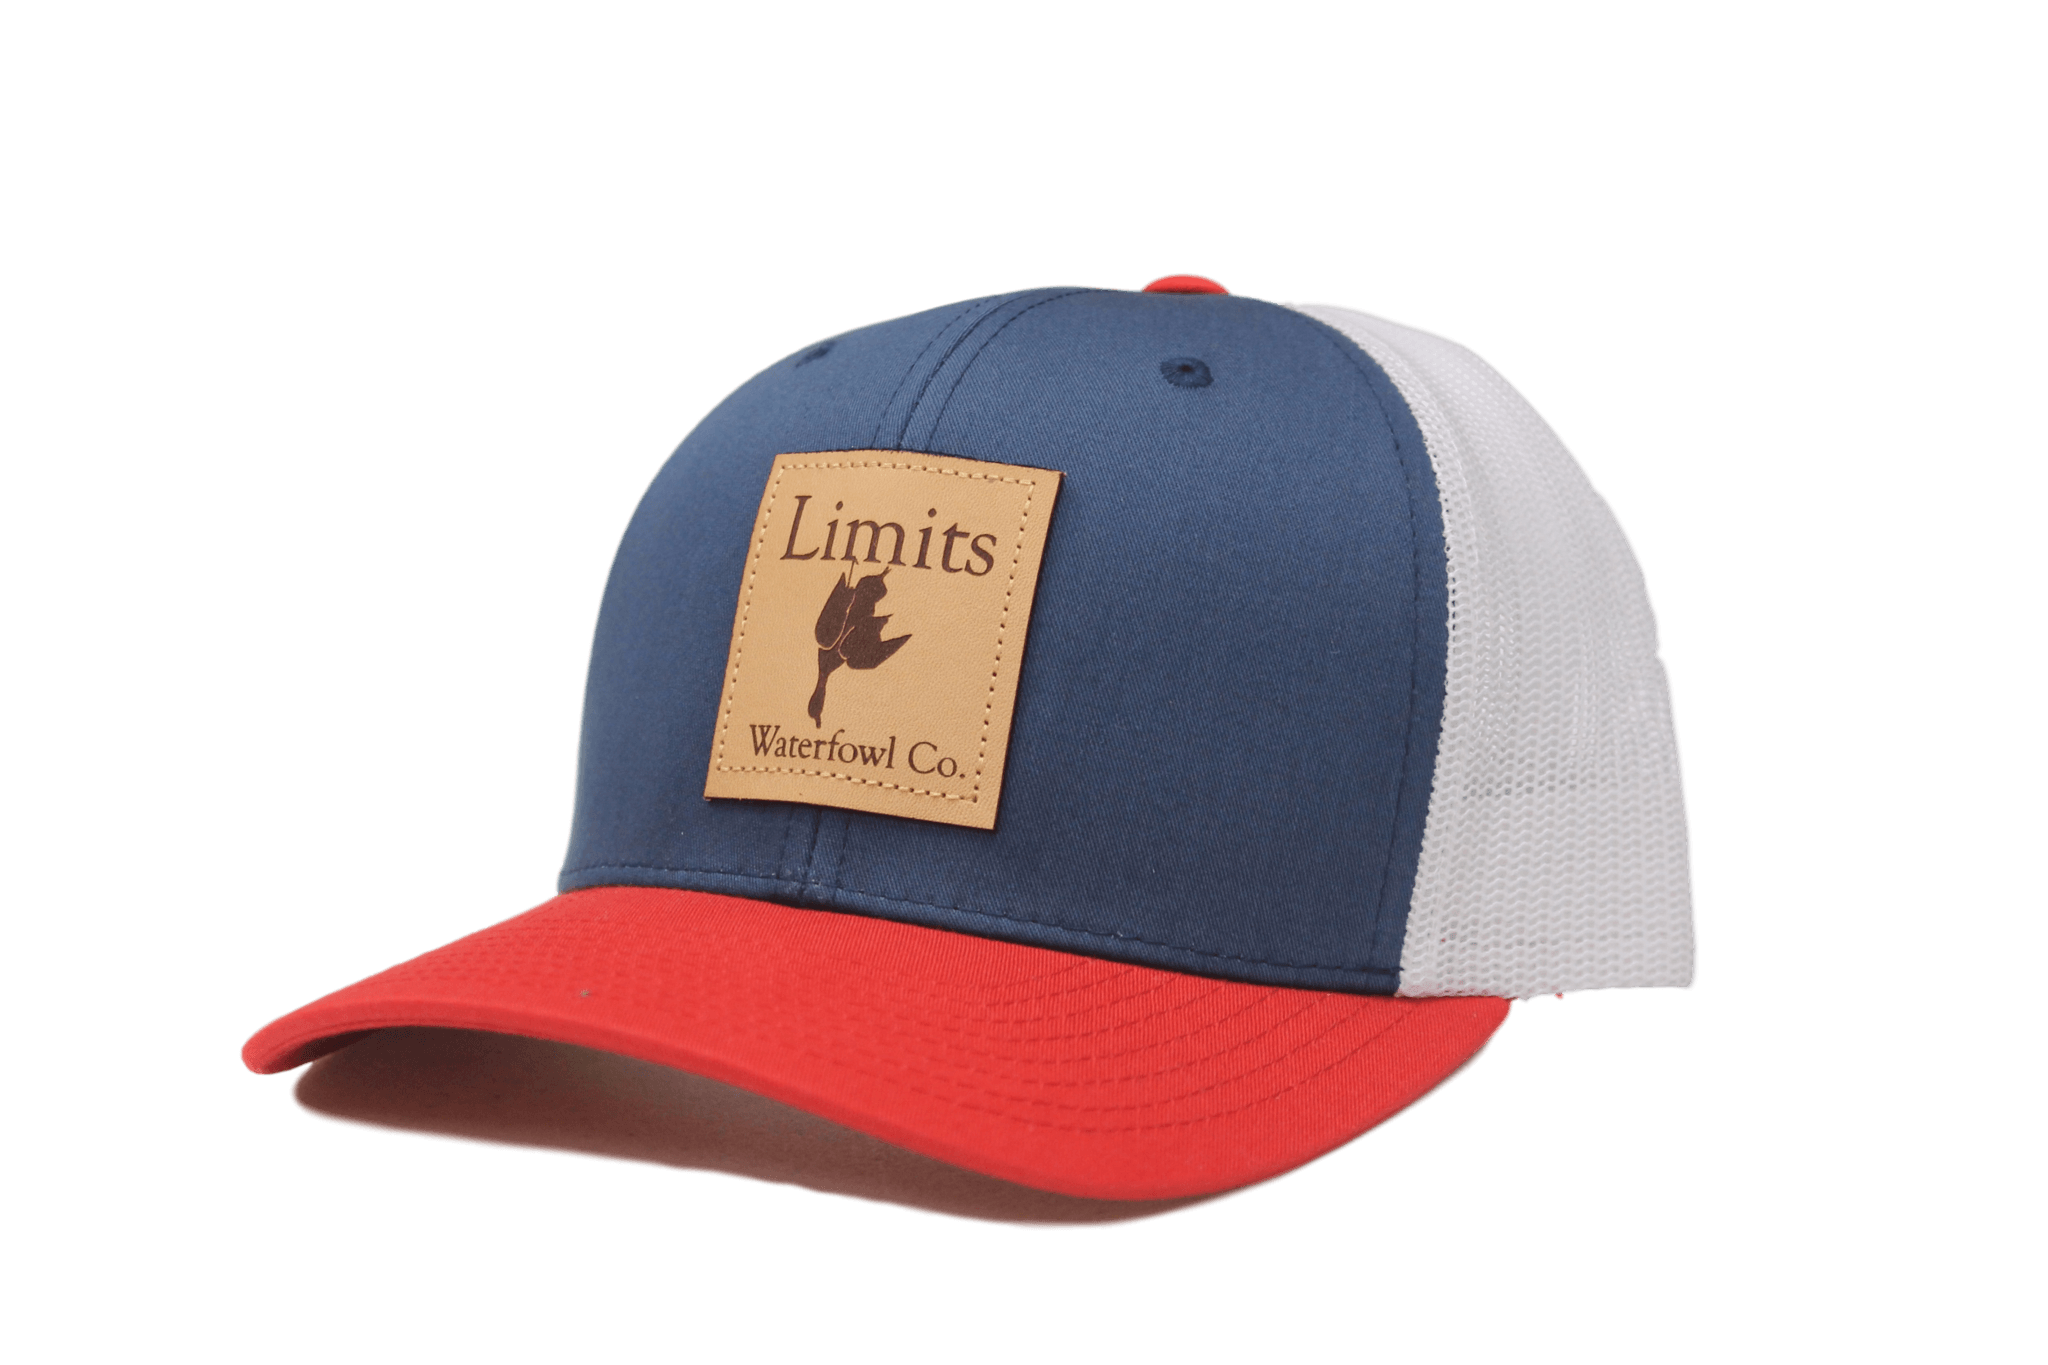 White and Blue Square Logo - Square Patch Logo Trucker Red, White, Blue Waterfowl Co